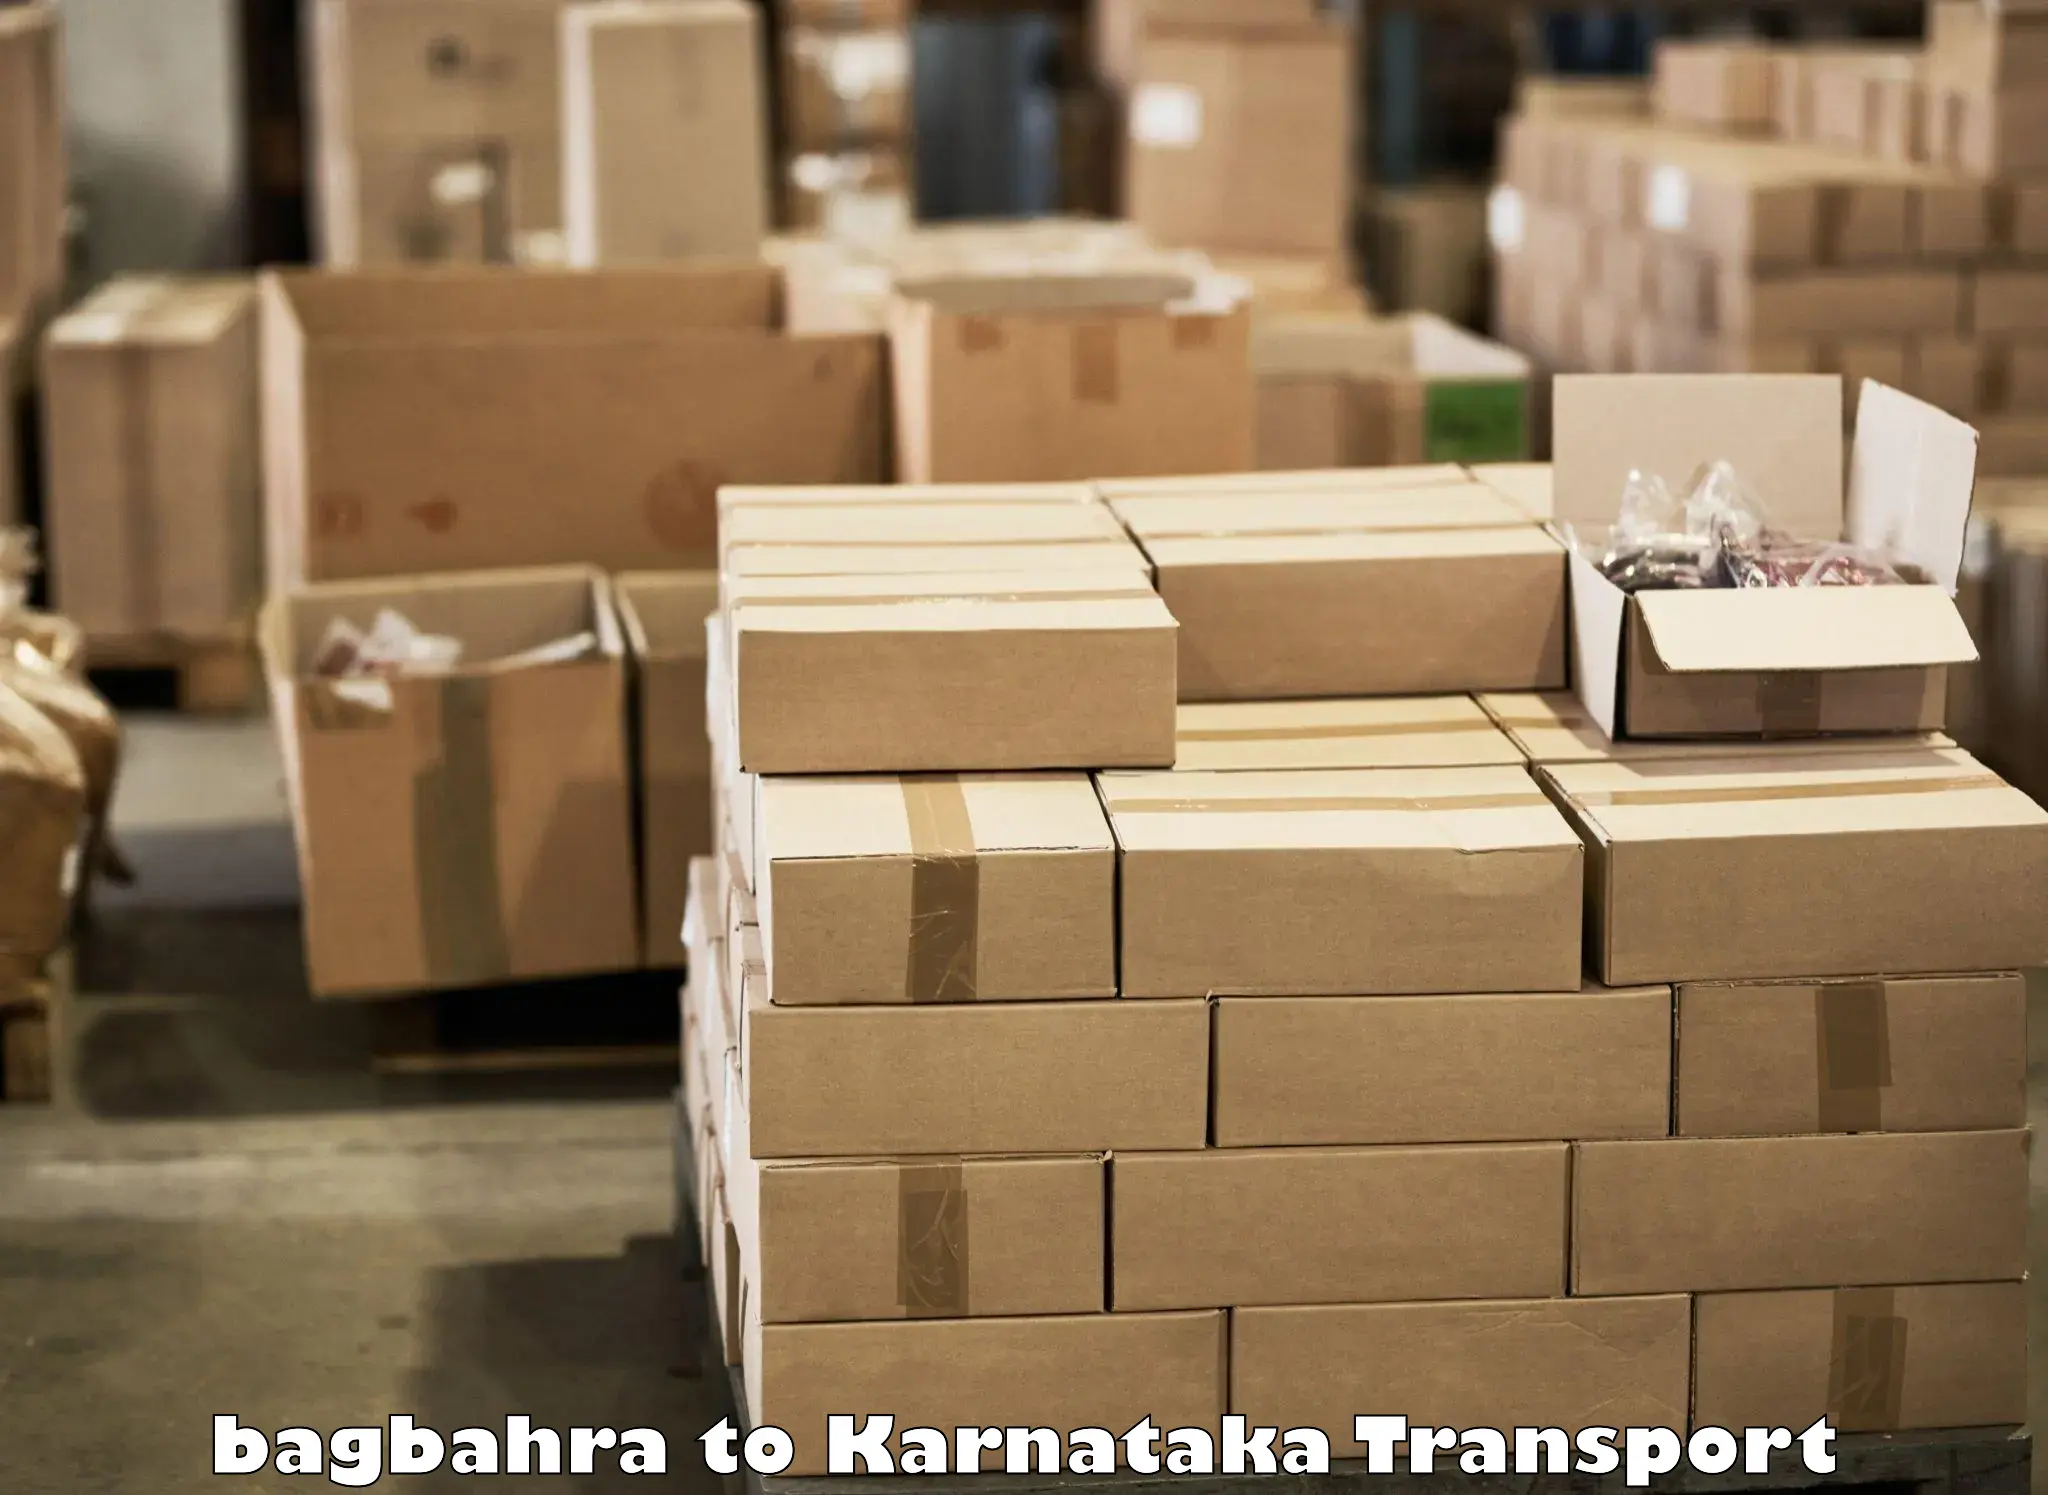 Express transport services bagbahra to Byndoor